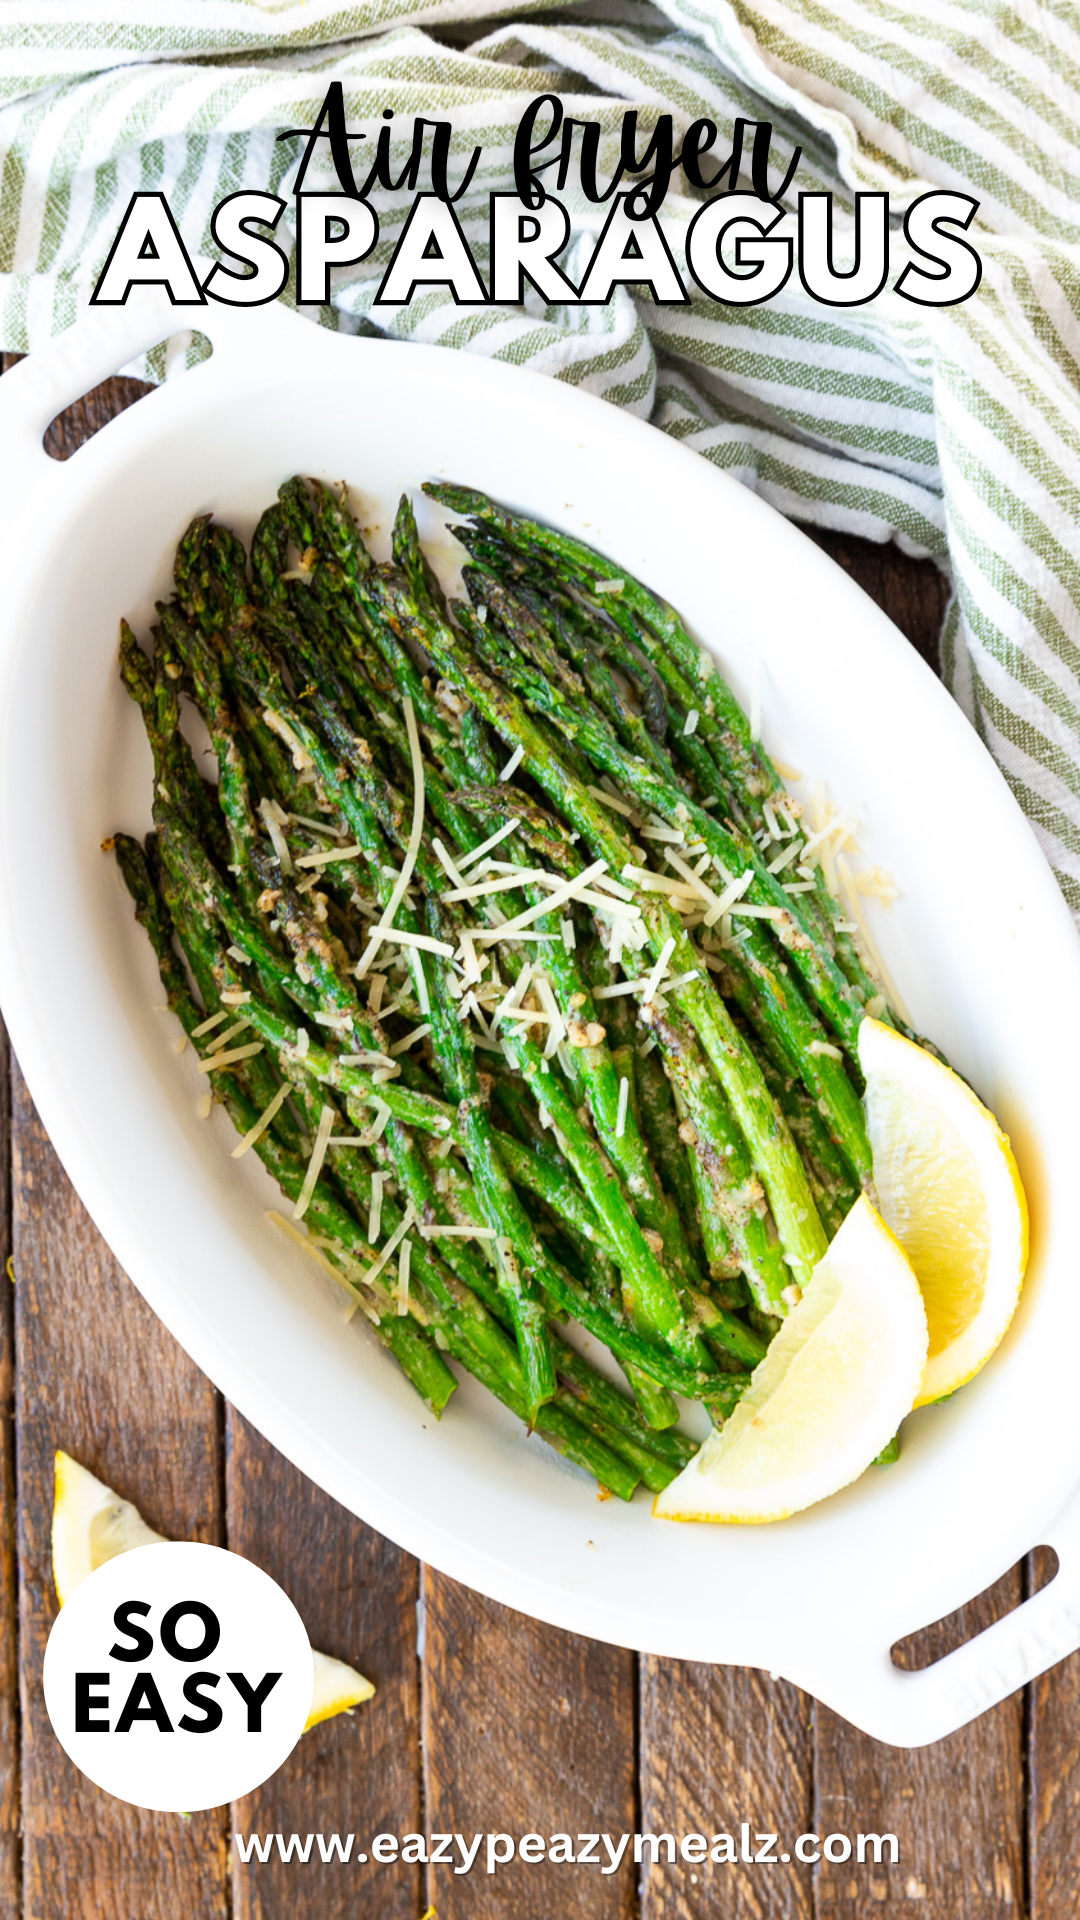 The world's best asparagus and so easy to make with the air fryer. Loaded with flavor, low mess, and crisp tender results. 